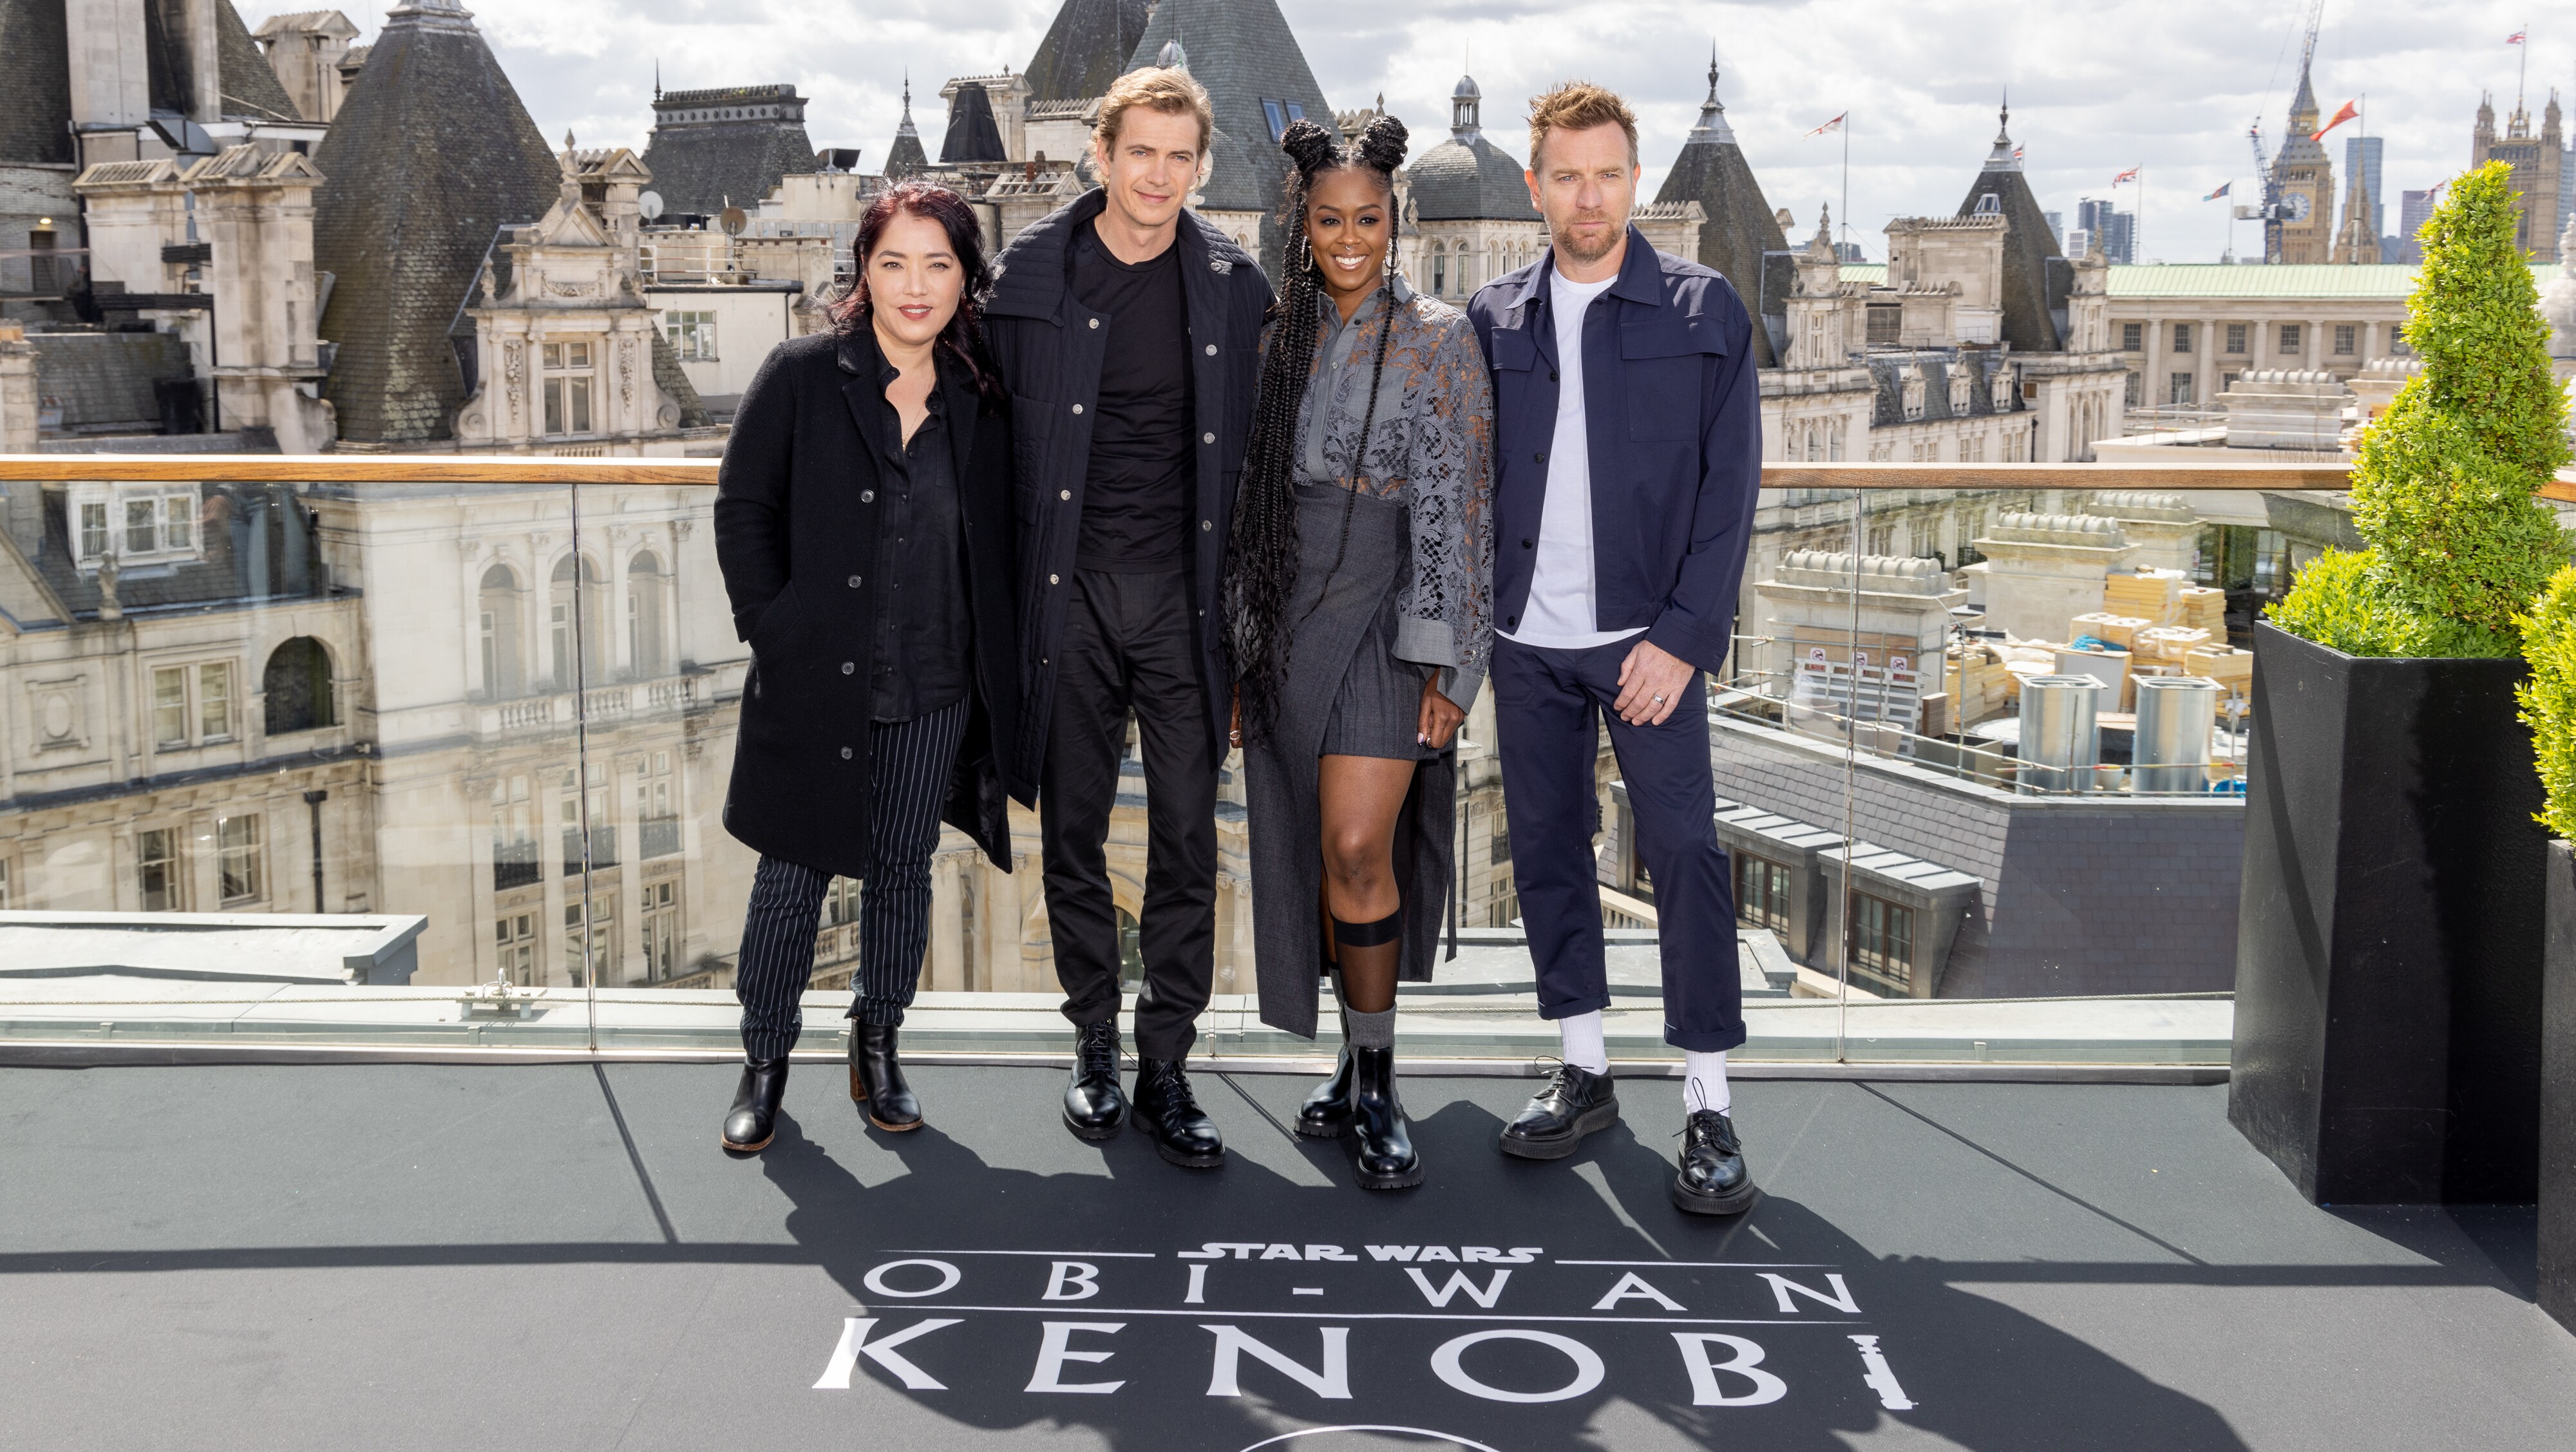 LONDON, ENGLAND - MAY 12: (L to R) Director and Executive Producer Deborah Chow, Hayden Christensen, Moses Ingram and Ewan McGregor attend the photocall for the new Disney+ limited series "Obi Wan Kenobi" at the Corinthia Hotel on May 12, 2022 in London, England. Obi-Wan Kenobi will be exclusively available on Disney+ from May 27. (Photo by StillMoving.net for Disney)